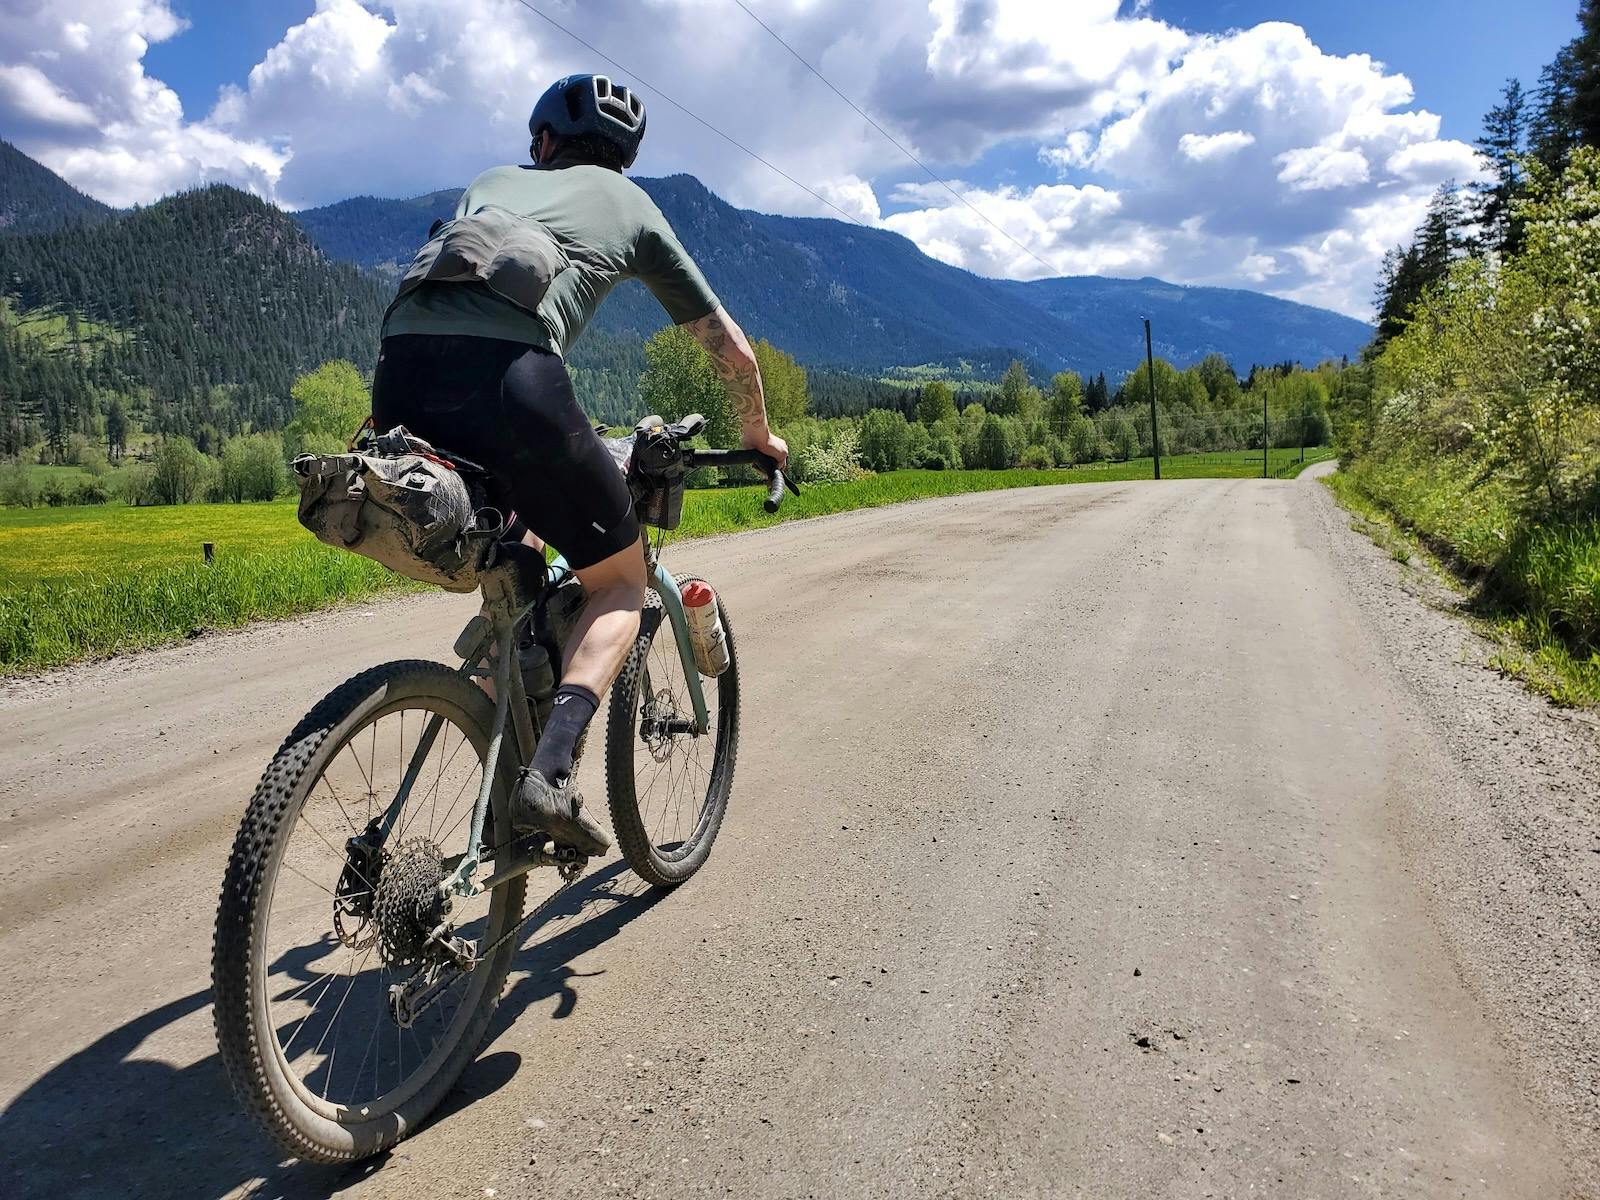 Cory Ostertag: A Journey Into Self-Sustained Bikepack Racing